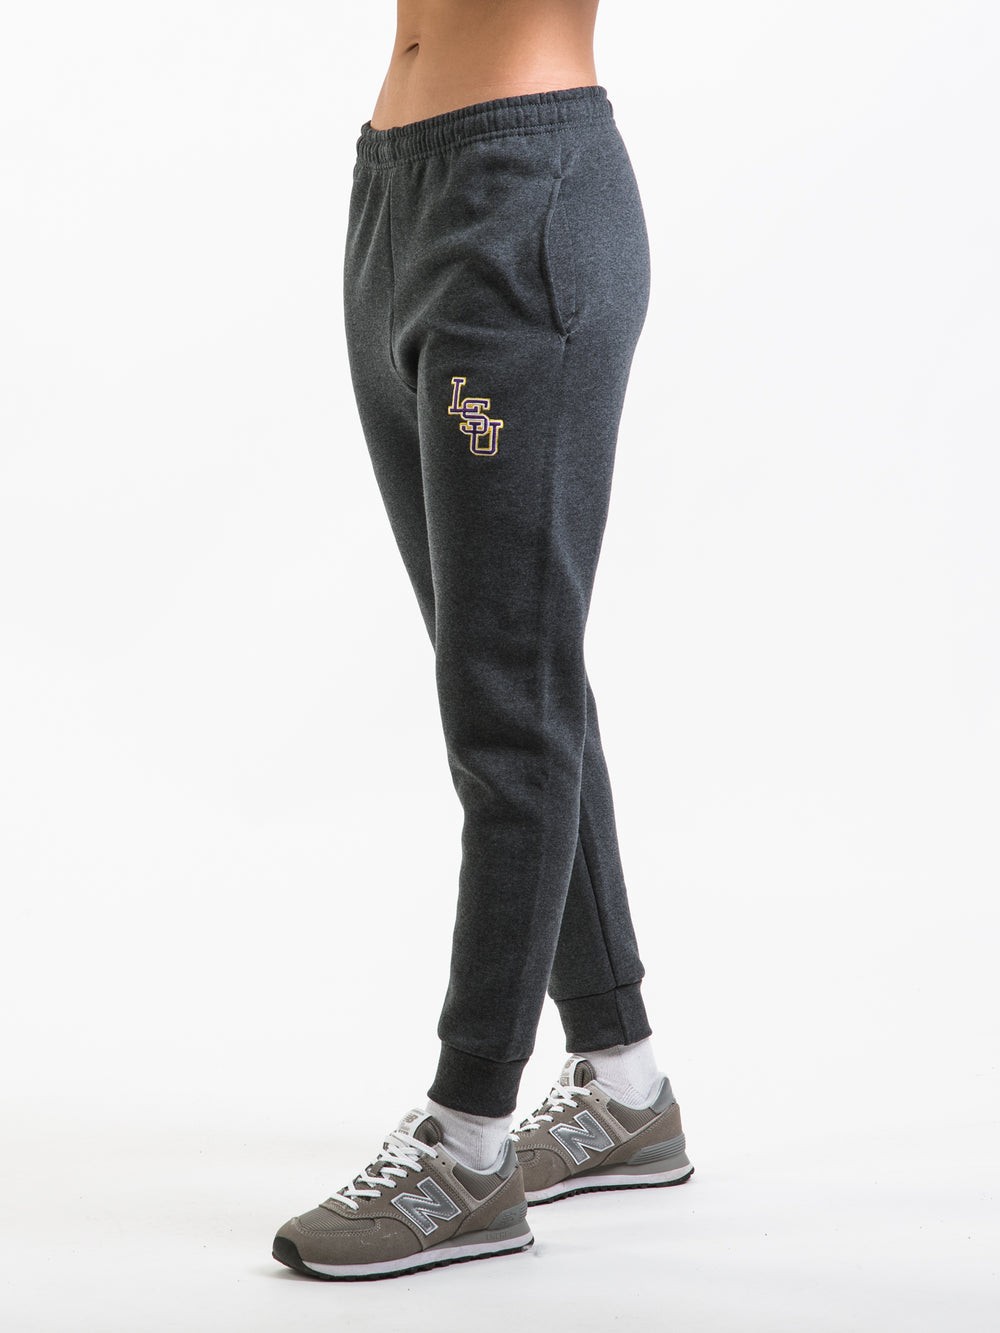 RUSSELL LSU JOGGERS